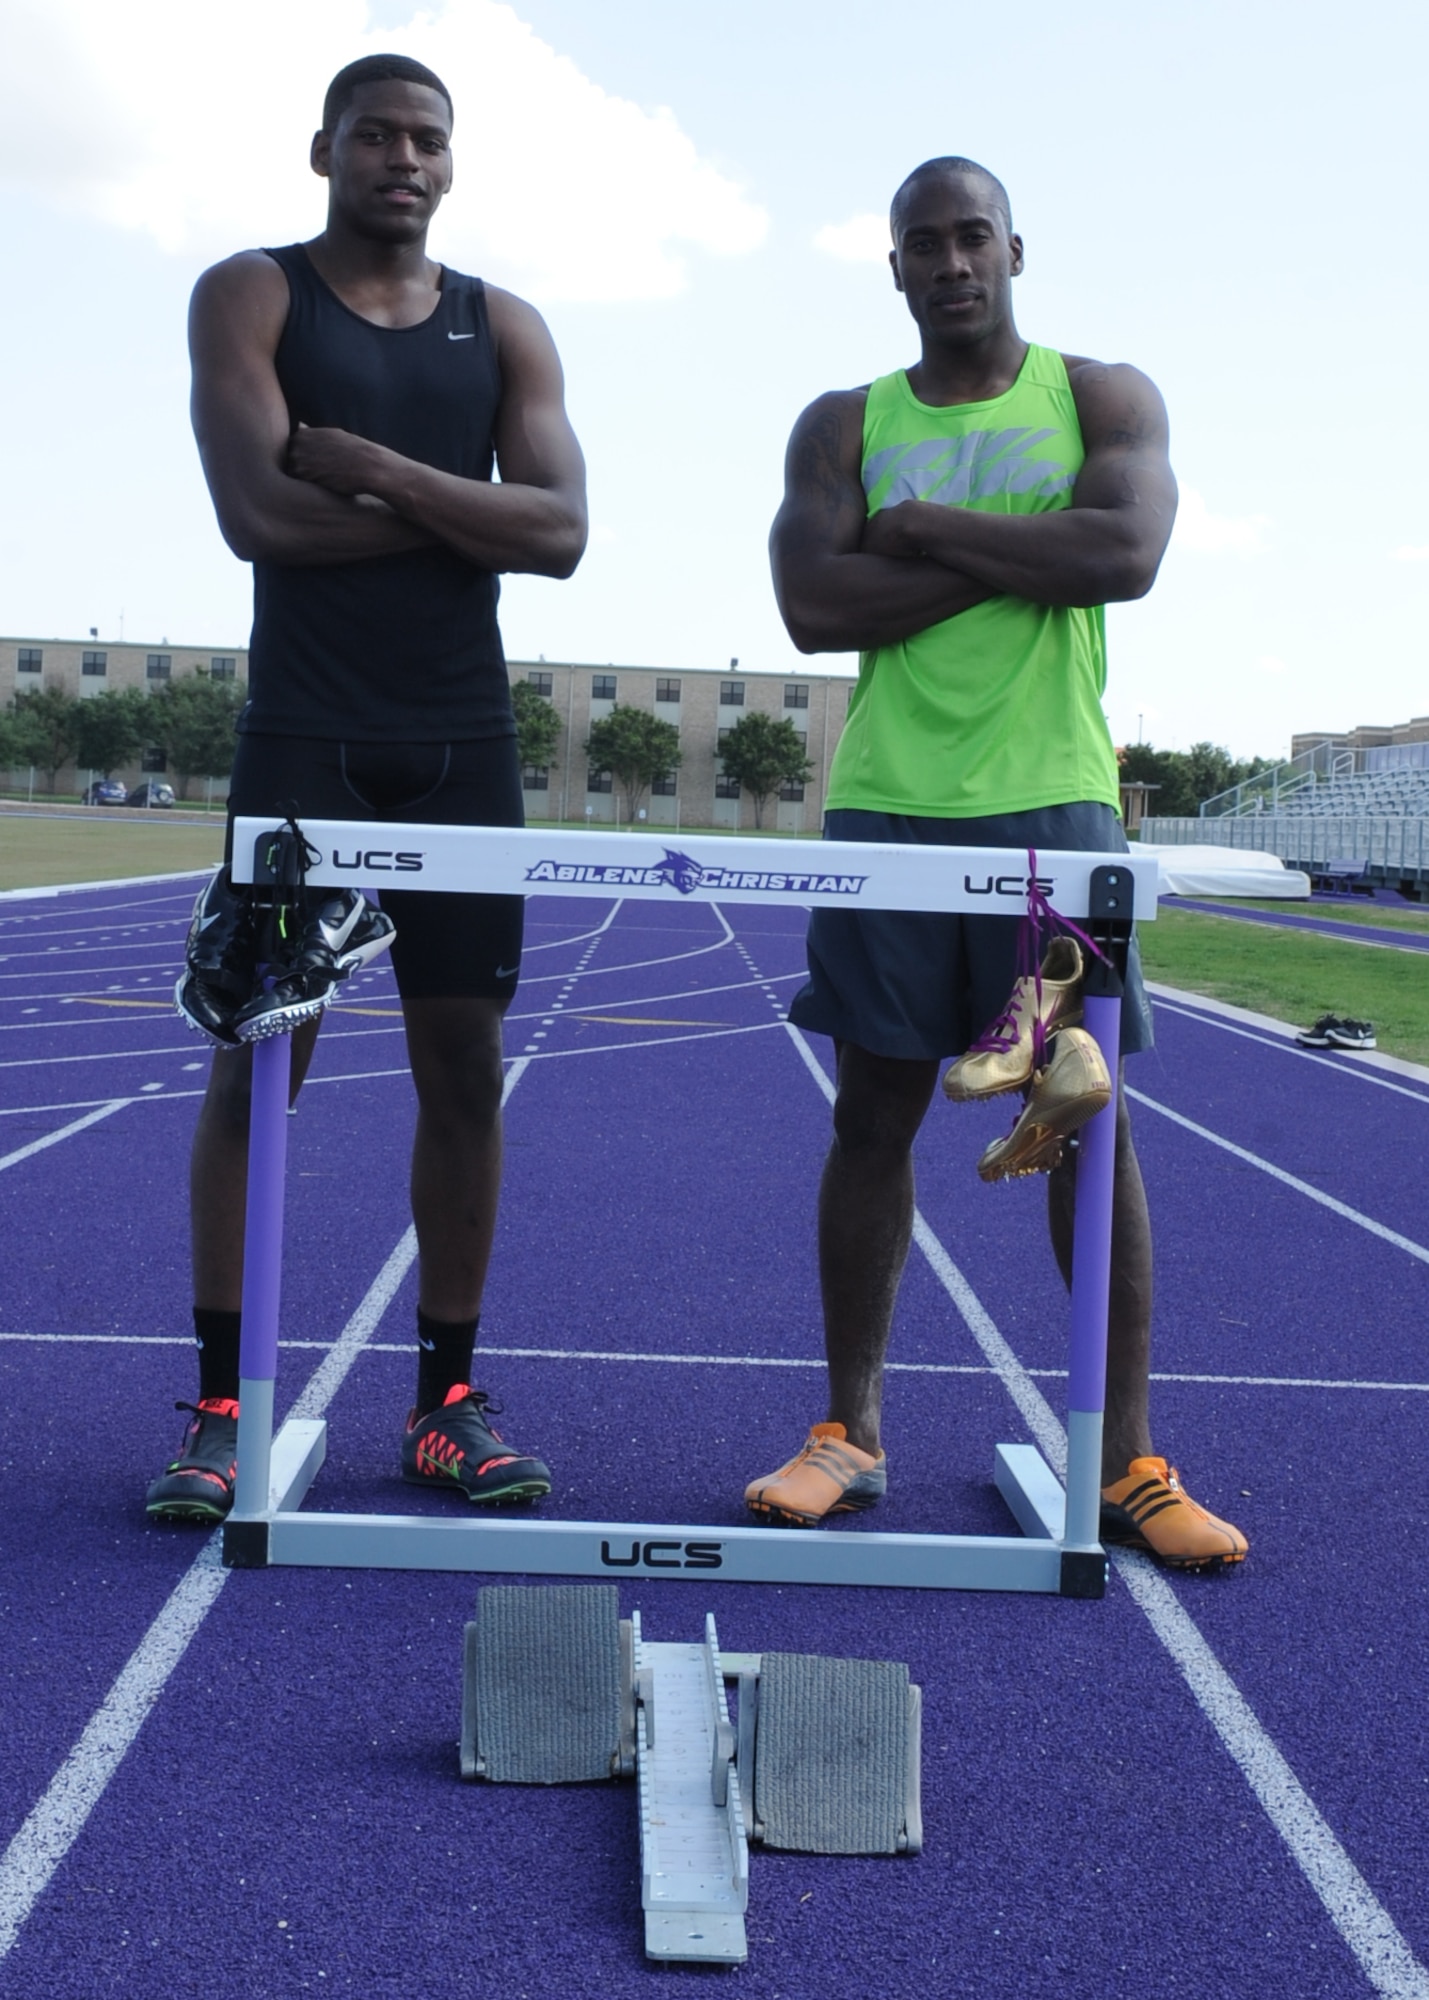 U.S. Air Force Senior Airmen Parnelle Shands, left, 317th Aircraft Maintenance Squadron crew chief, and Kwesi Toney, 7th Logistics Readiness Squadron equipment, train in different track and field events May 18, 2015, at Abilene Christian University in Abilene, Texas. Both Airmen were selected to represent the U.S. Air Forces in Europe at the 2015 Headquarter Air Command Track and Field Championship, May 26-28, 2015, in Amsterdam, Netherlands. (U.S. Air Force photo by Senior Airman Shannon Hall/Released)